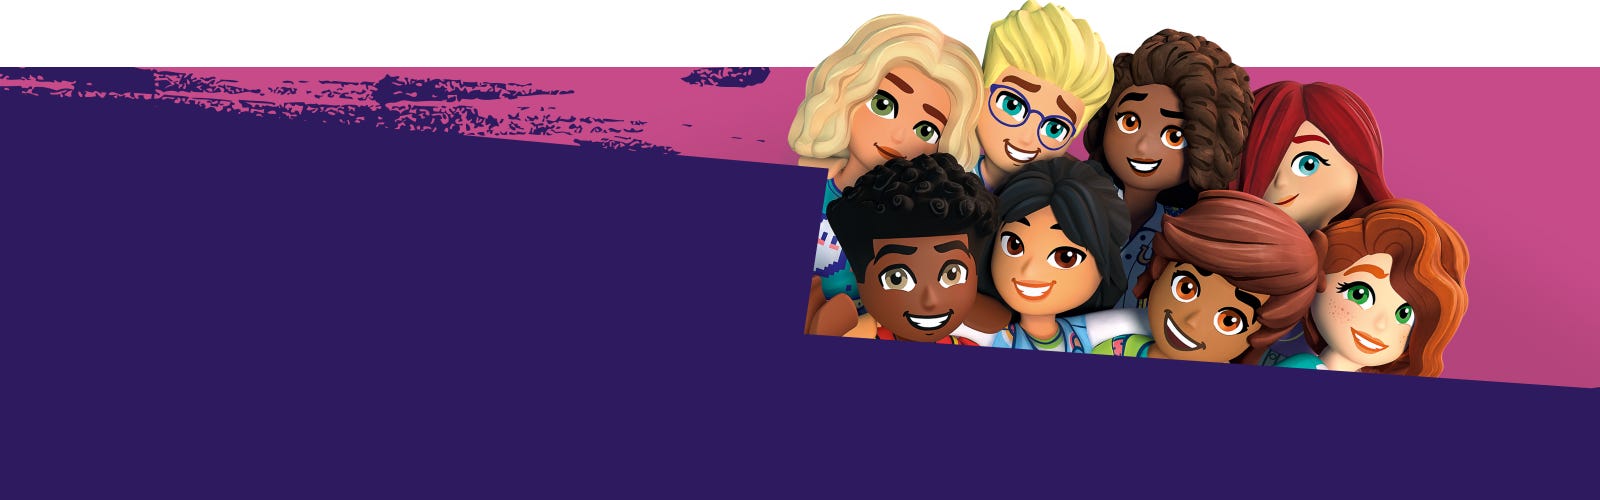 LEGO® Friends Introducing a new world of friends | Official LEGO® US